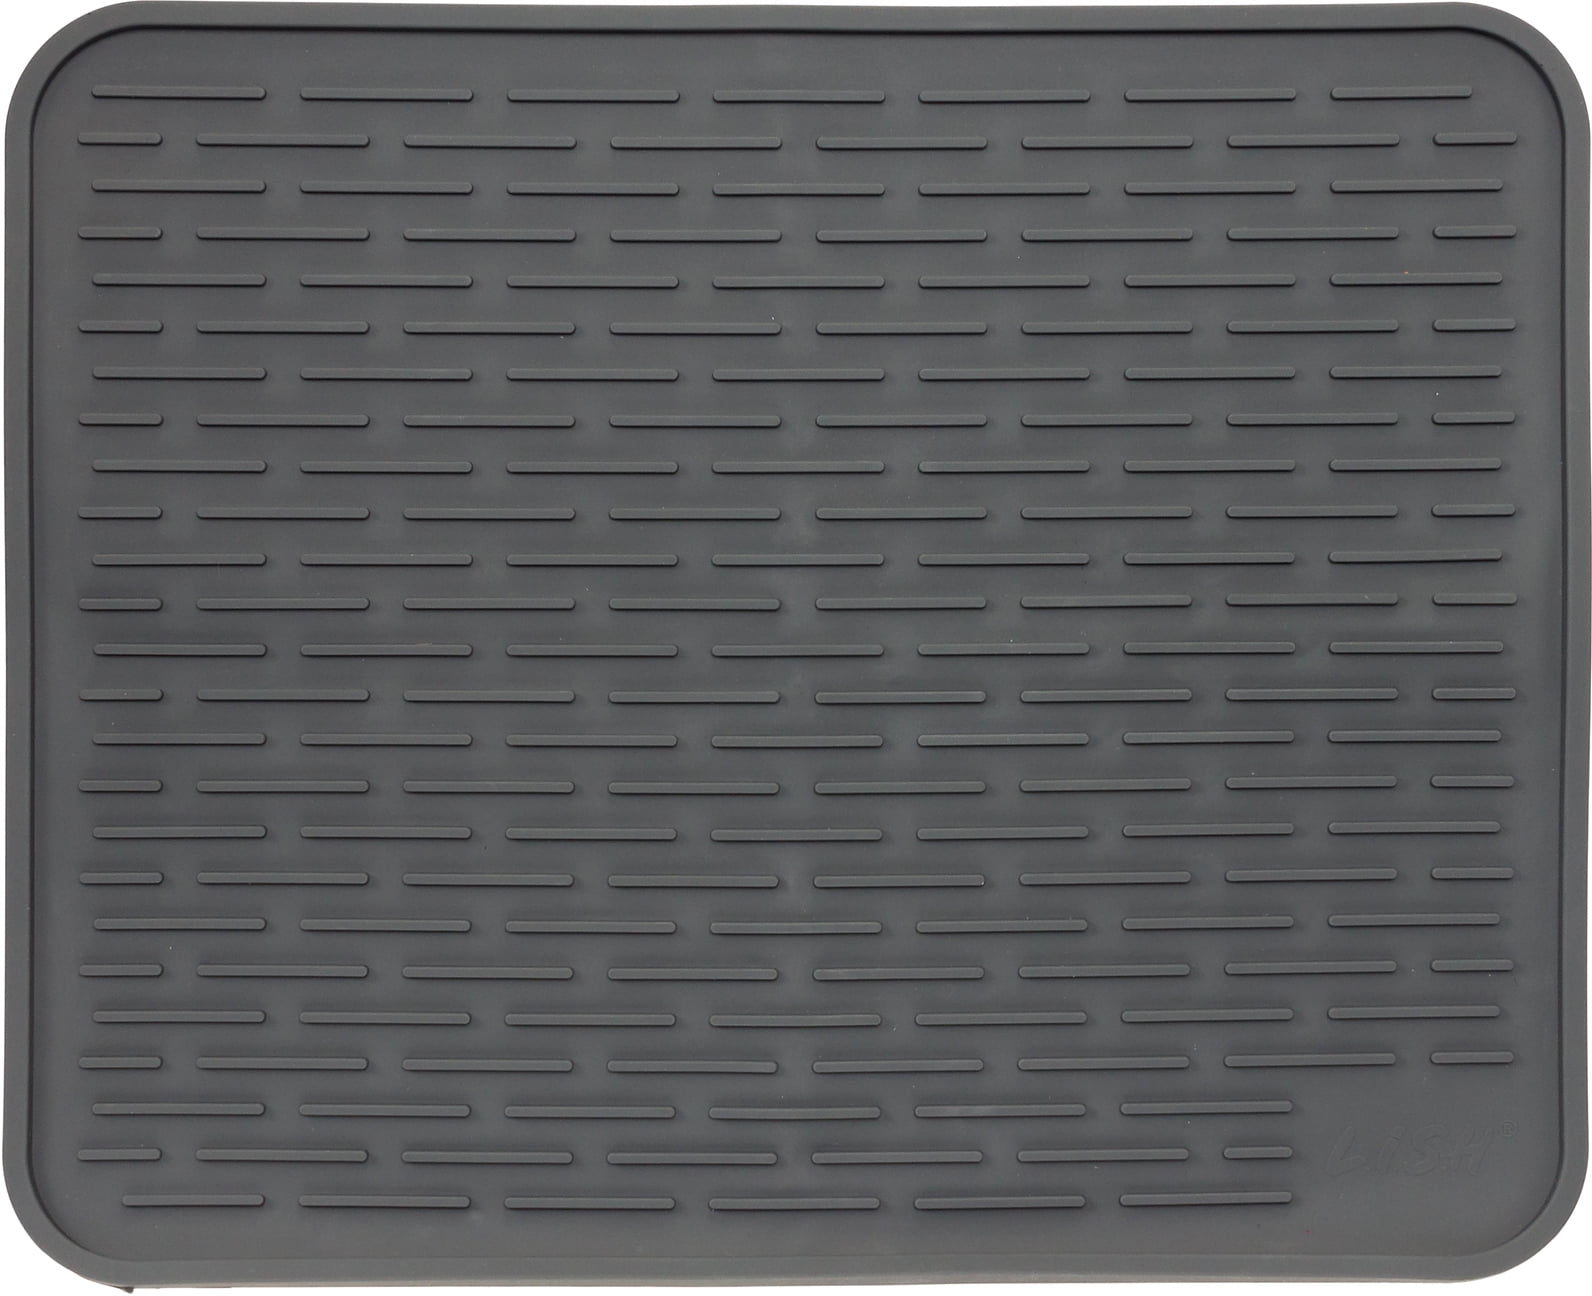 BasicForm XXL Silicone Drying Mat for Kitchen Countertop 22x17 Black 